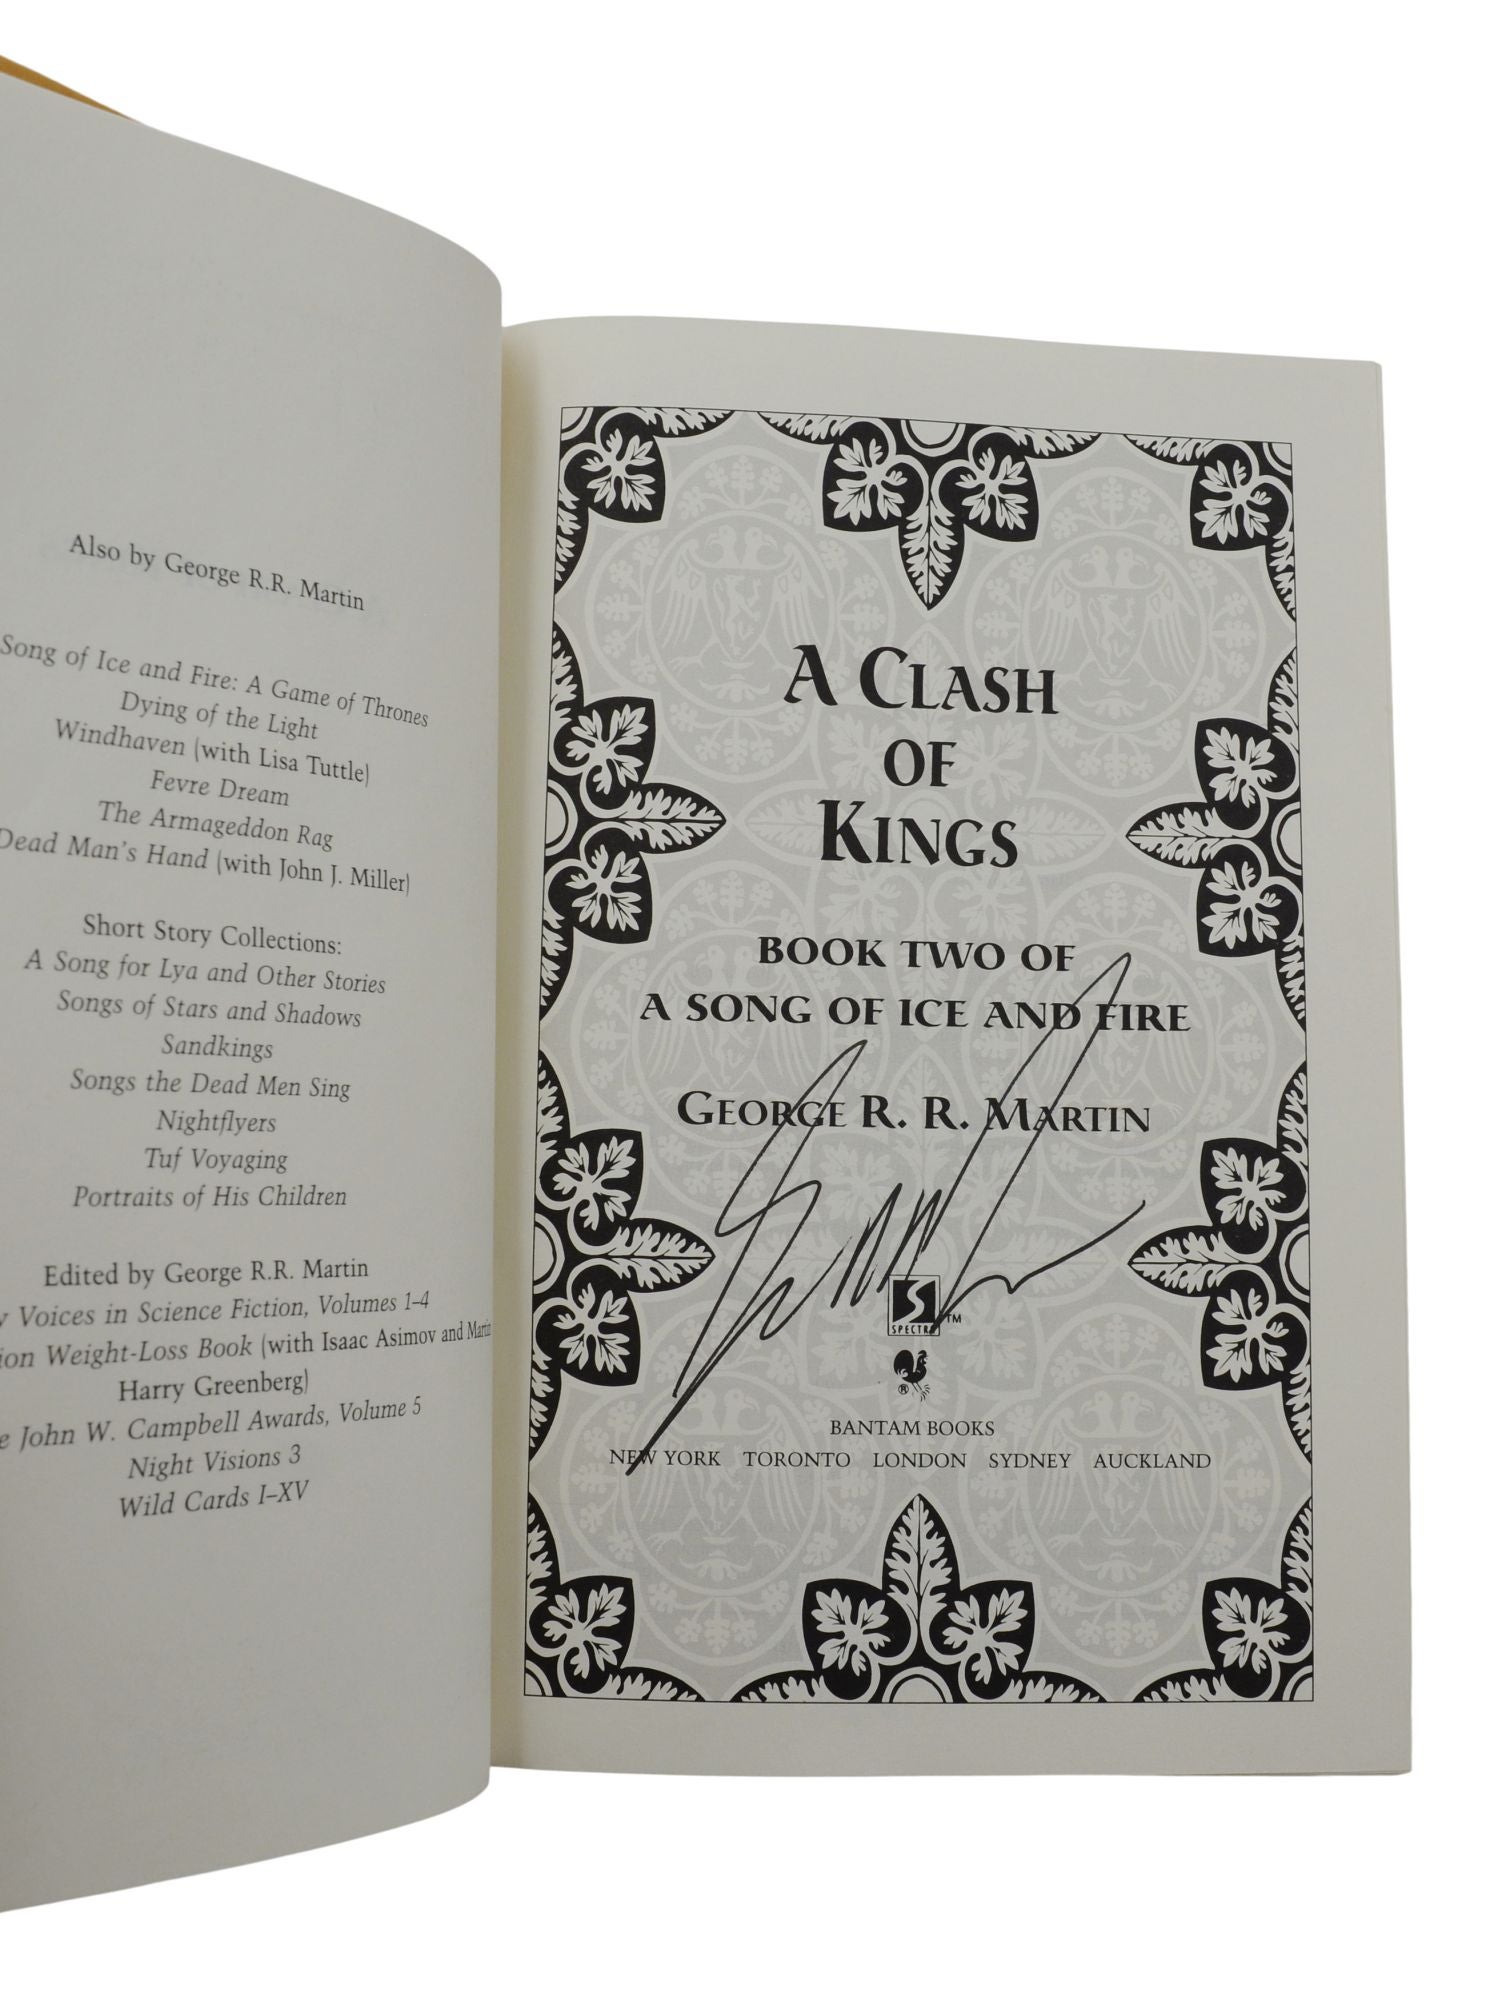 A Clash of Kings: The Illustrated Edition by George R. R. Martin:  9781984821157 | : Books